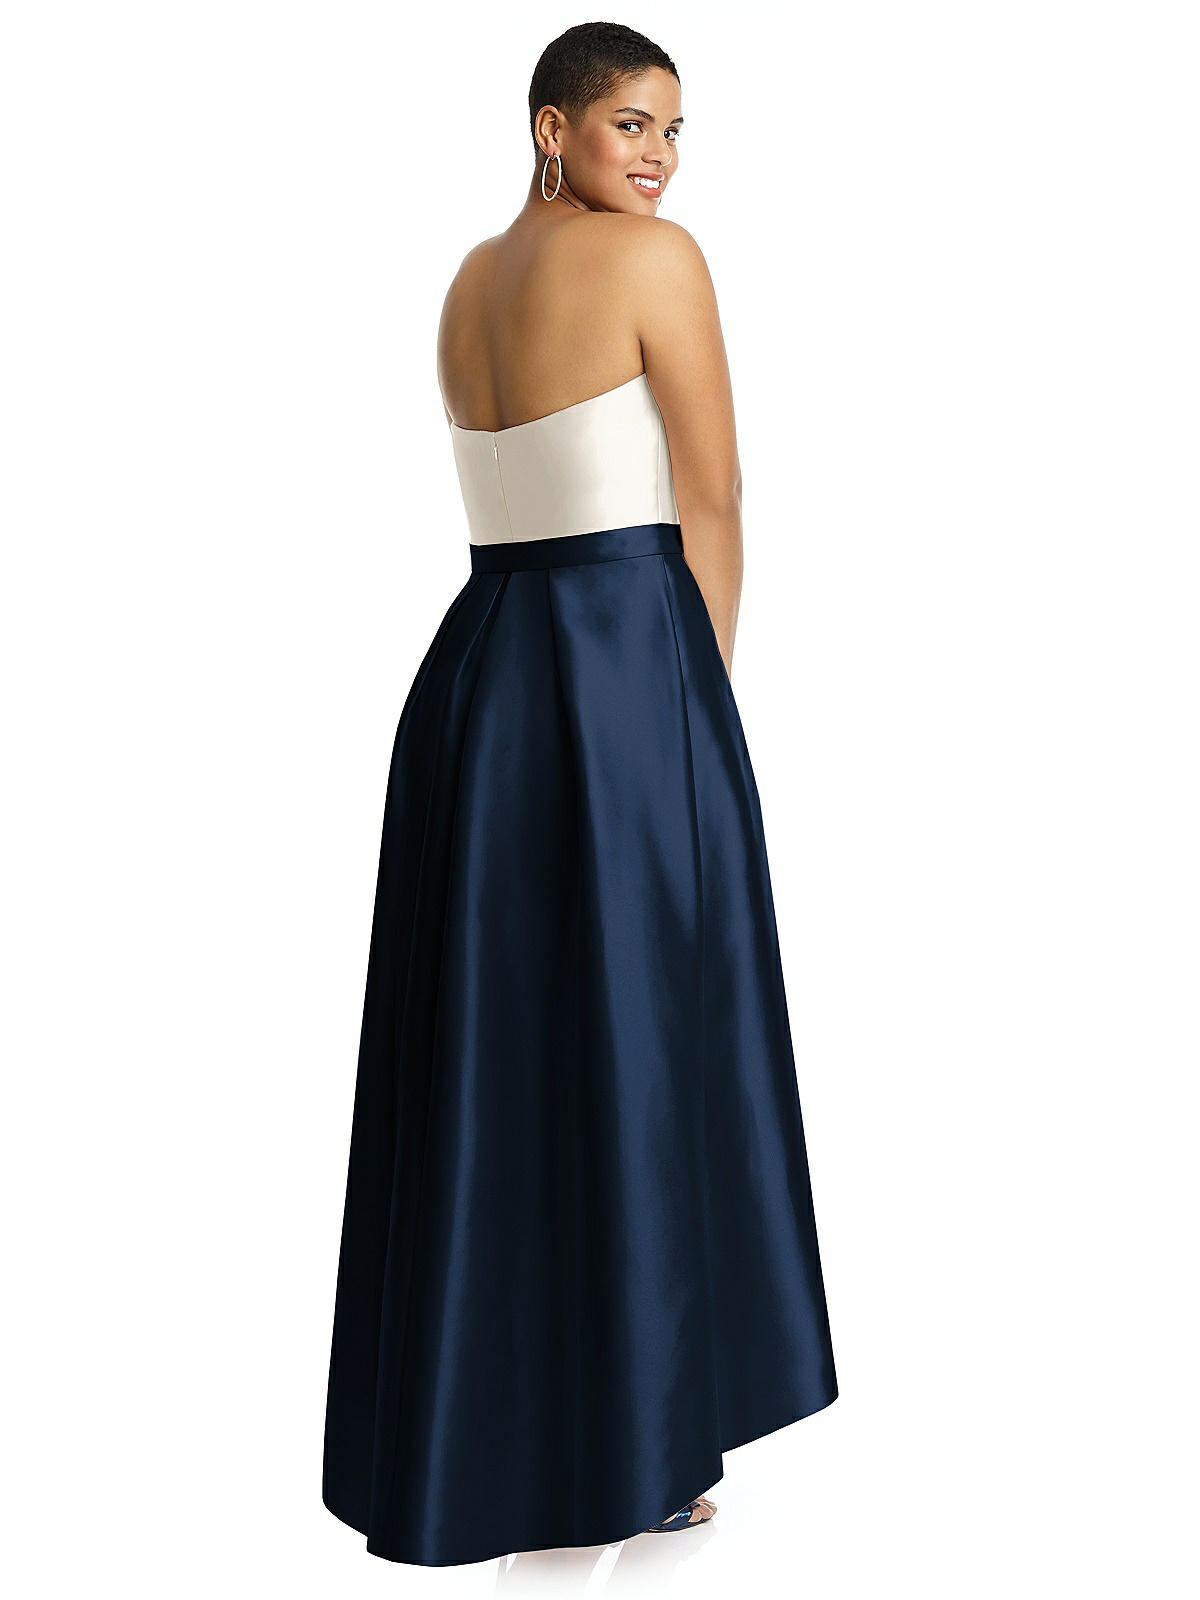 Nautical-themed navy and white dress for weddings